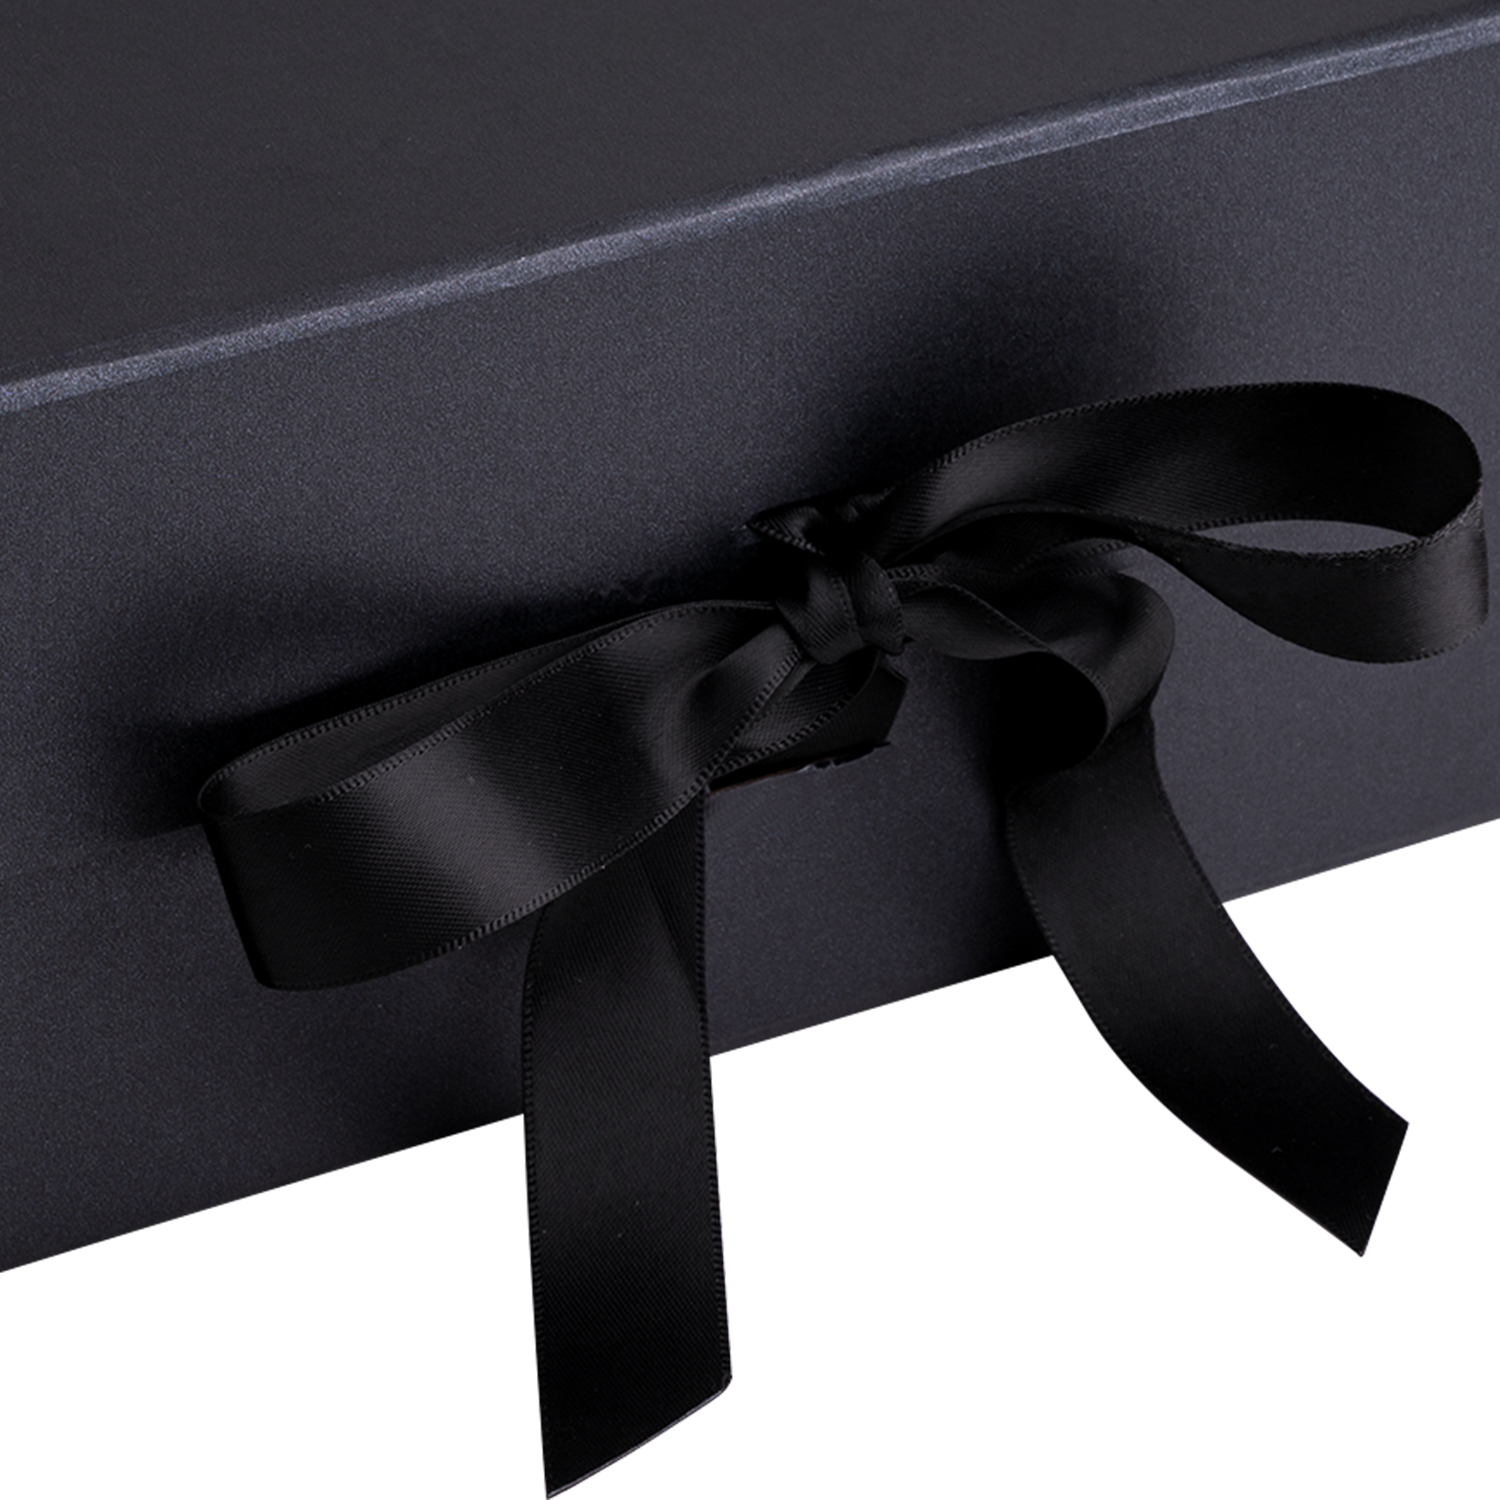 Black Magnetic Gift Box Rigid Box With Glossy Effect LOGO Perfect For Birthdays Easter Wedding Valentines Day and Office Parties